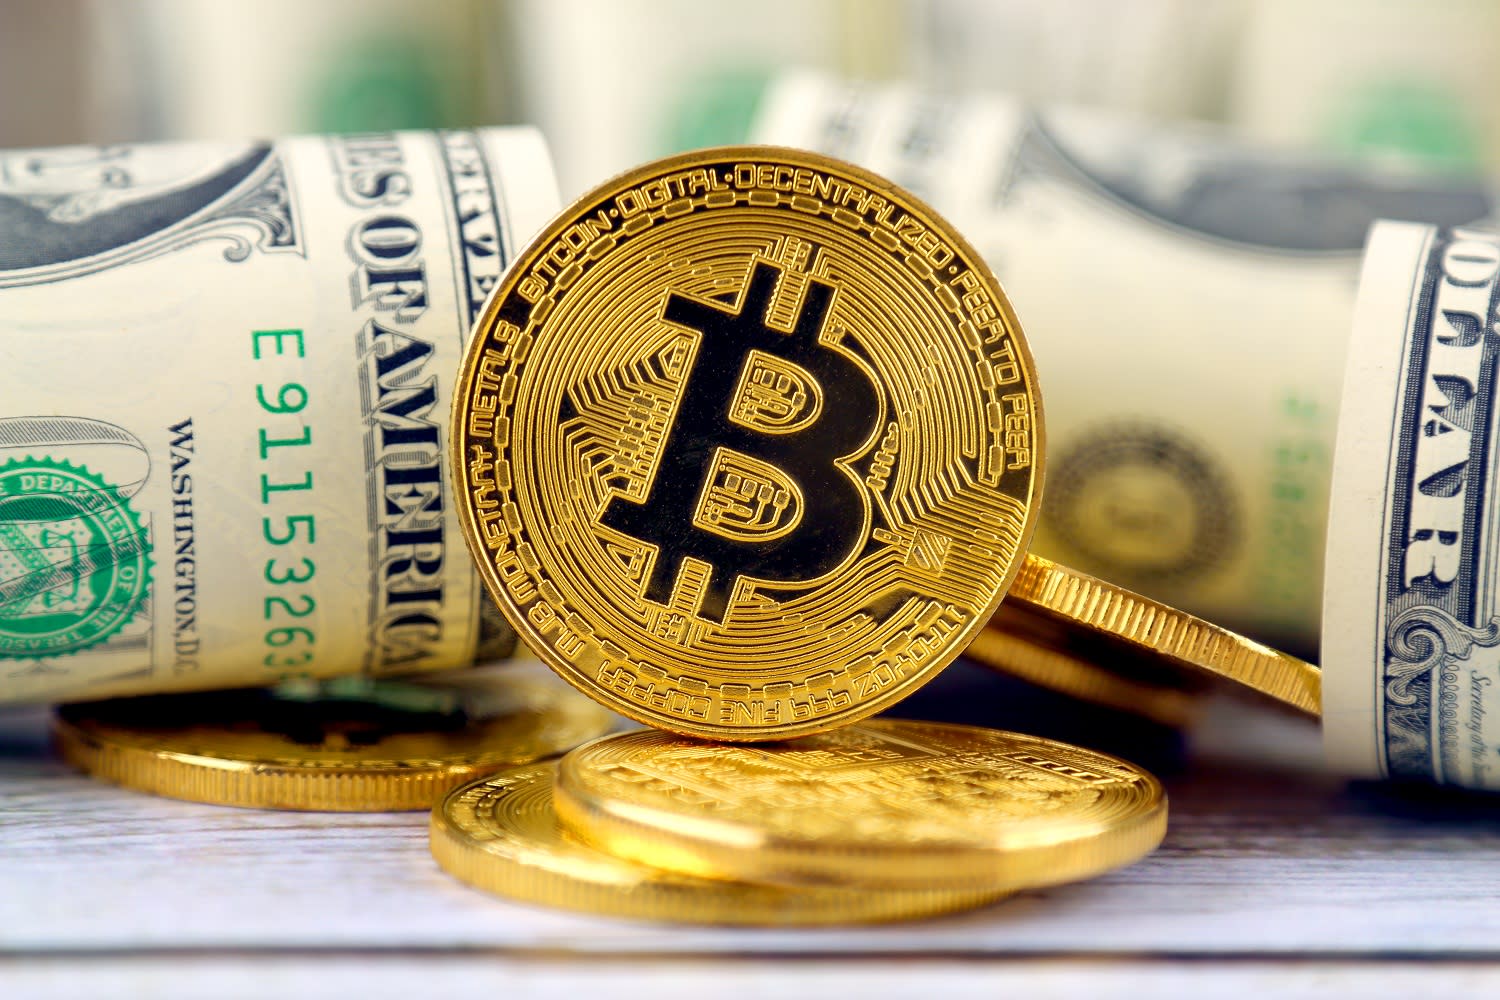 Bitcoin worth $ 1B leaves currency base as ‘FOMO’ institution Buy: analyst